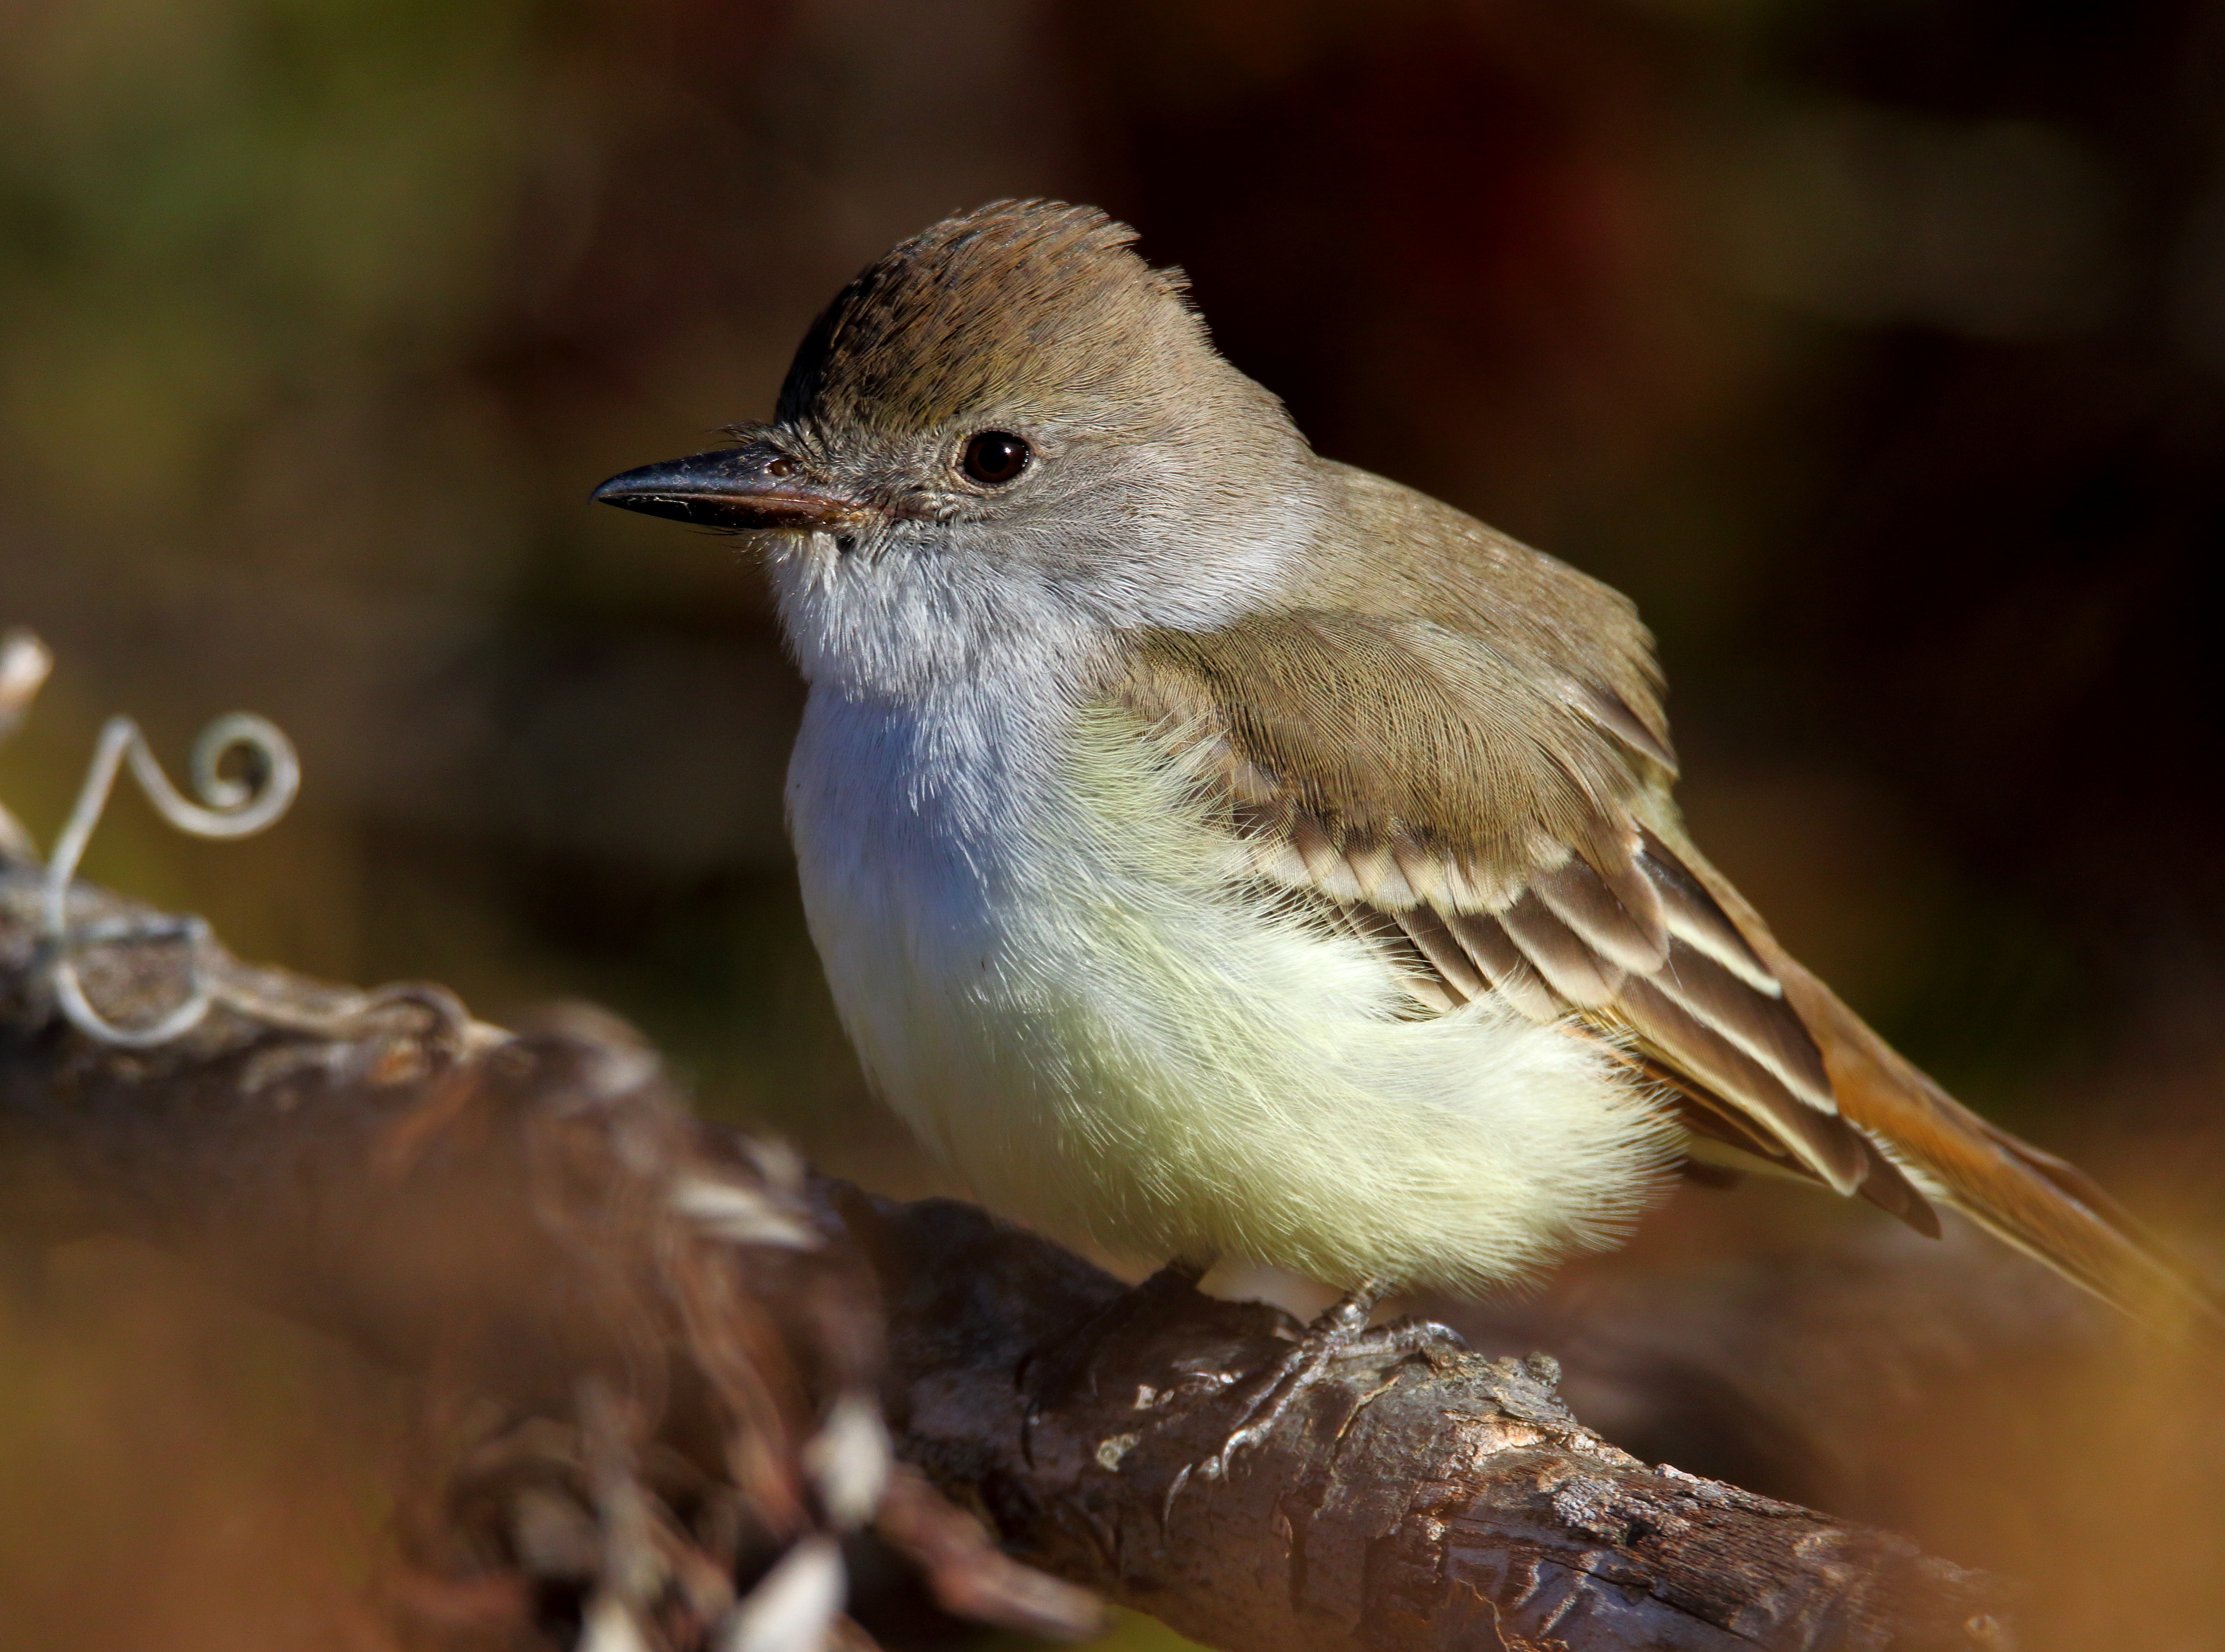 Ash-throated Flycatcher, a western species, has been documented at Mount Loretto. Photo: <a href="https://www.flickr.com/photos/120553232@N02/" target="_blank">Isaac Grant</a>